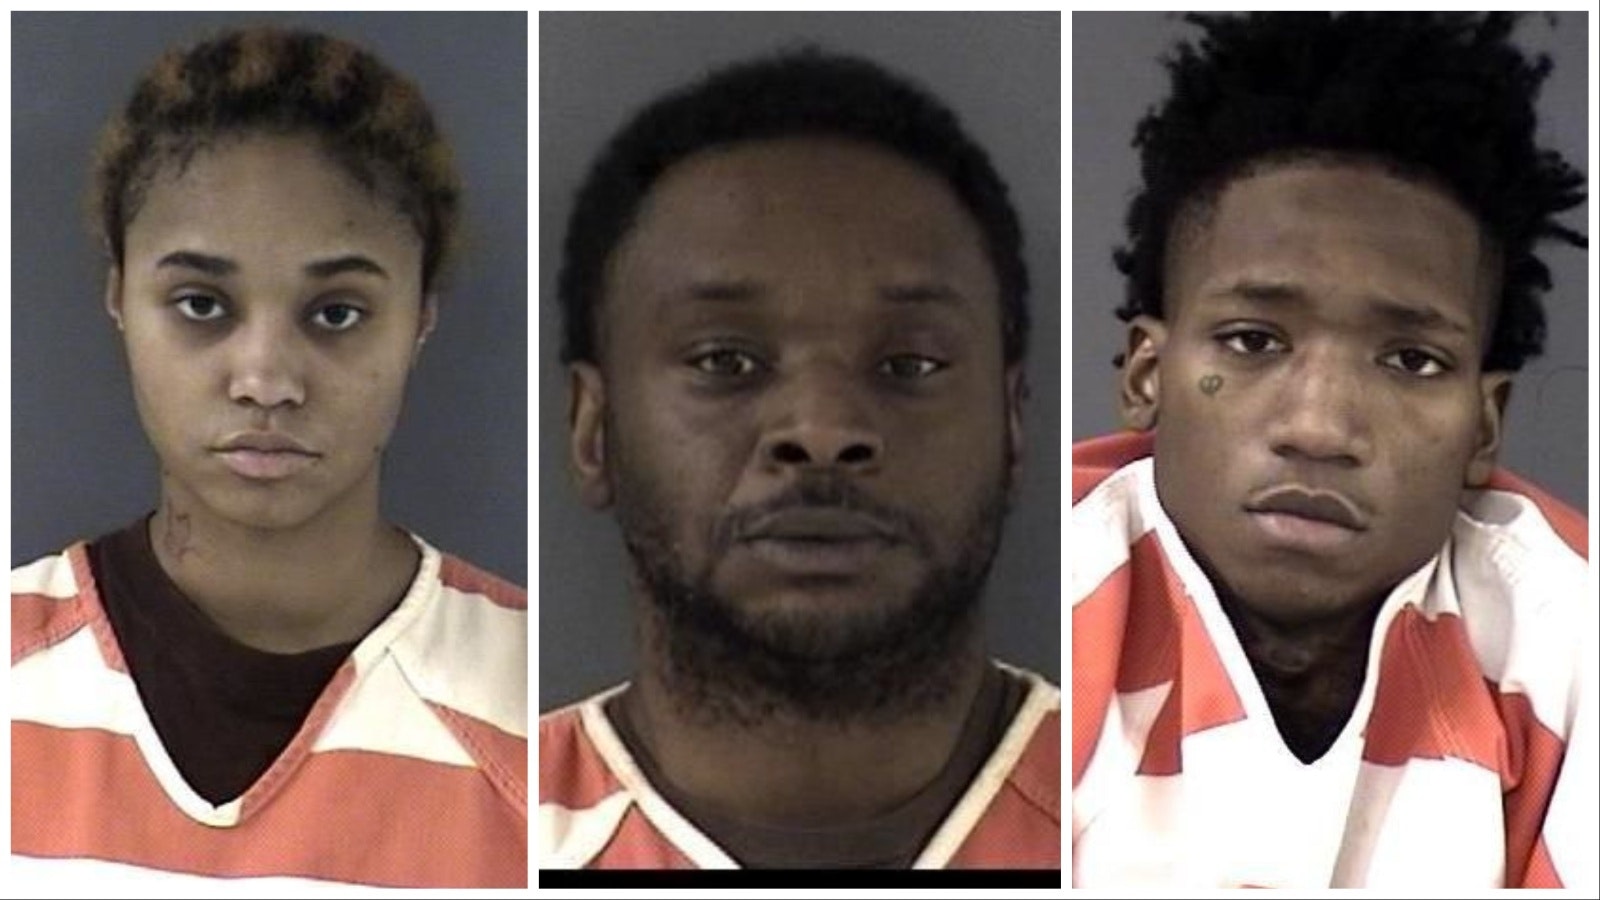 London Beaudoin, Christopher Parish, and Leo Bernard Smith Jr., are accused of fleeing with $25,000 after two unknown characters ripped apart a Cheyenne ATM with a stolen F250.